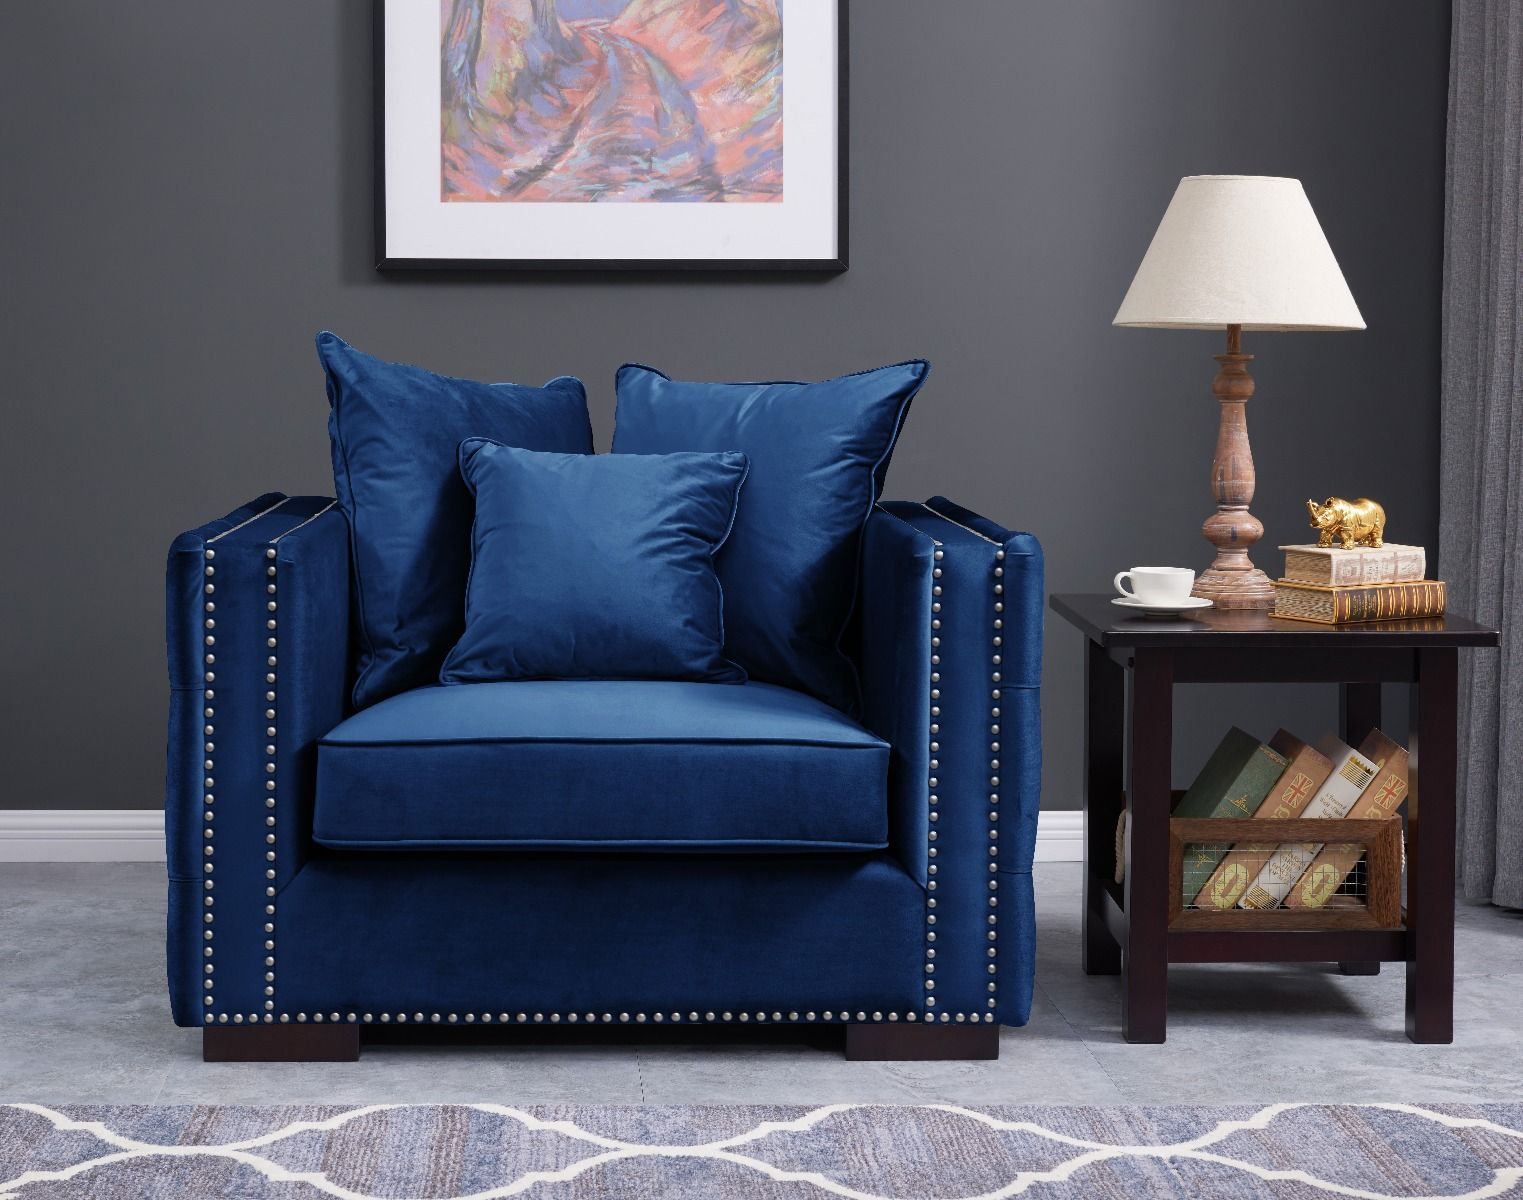 Moscow Chair Royal Blue